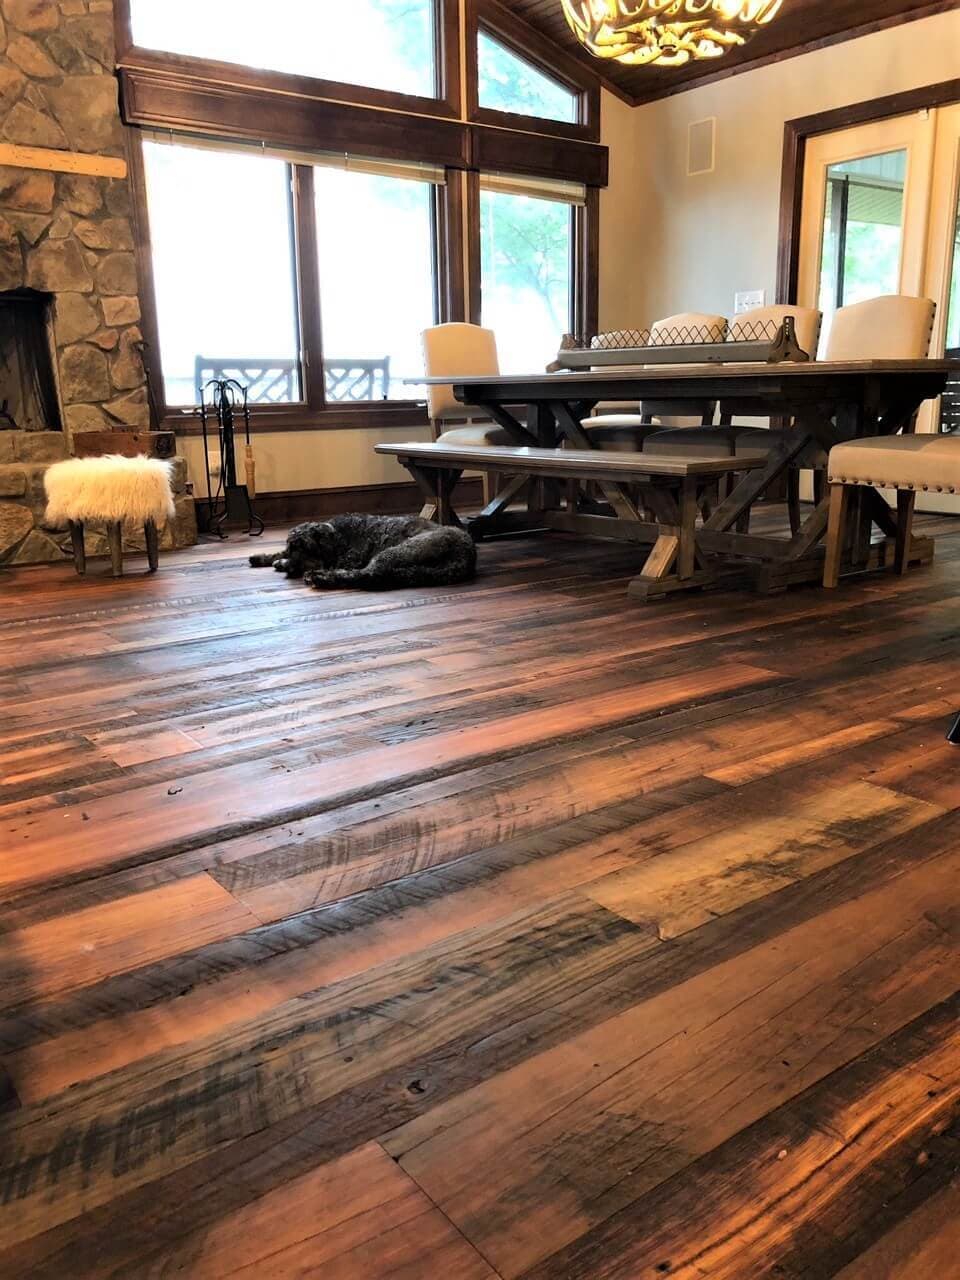 Rustic reclaimed heart pine flooring with natural woca oil finish in great room.